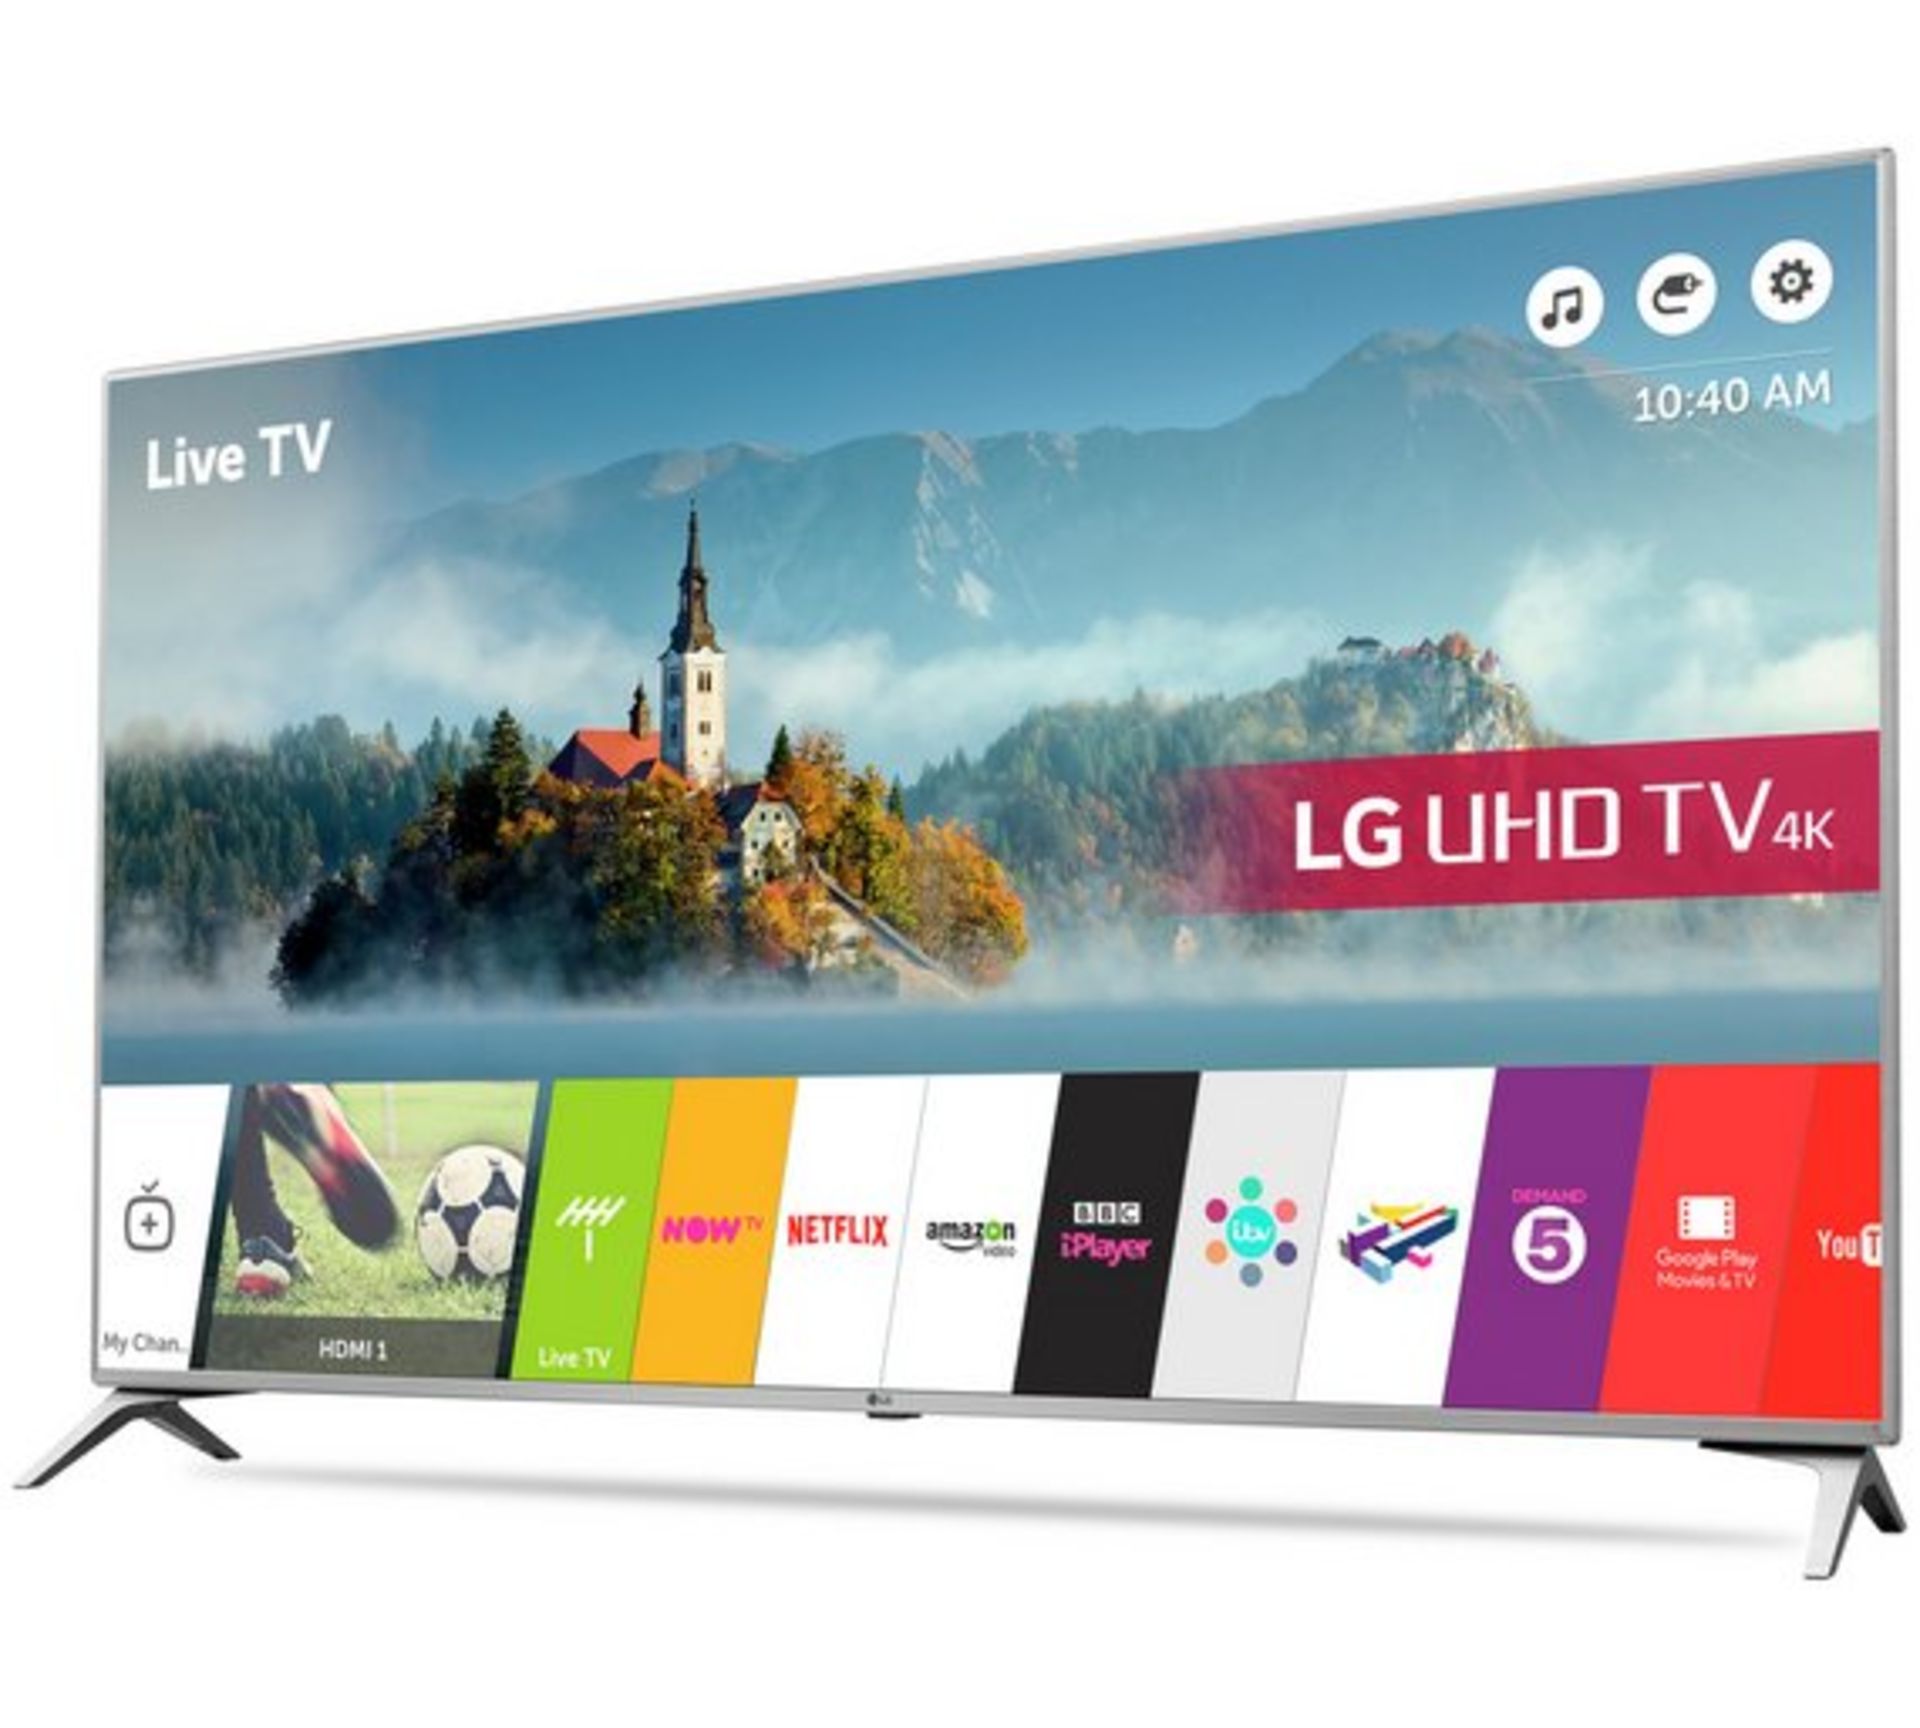 V Grade A LG 43" 4K Ultra HD Smart TV With HDR - Built In WiFi - Bluetooth - WebOS Operating - Image 2 of 5